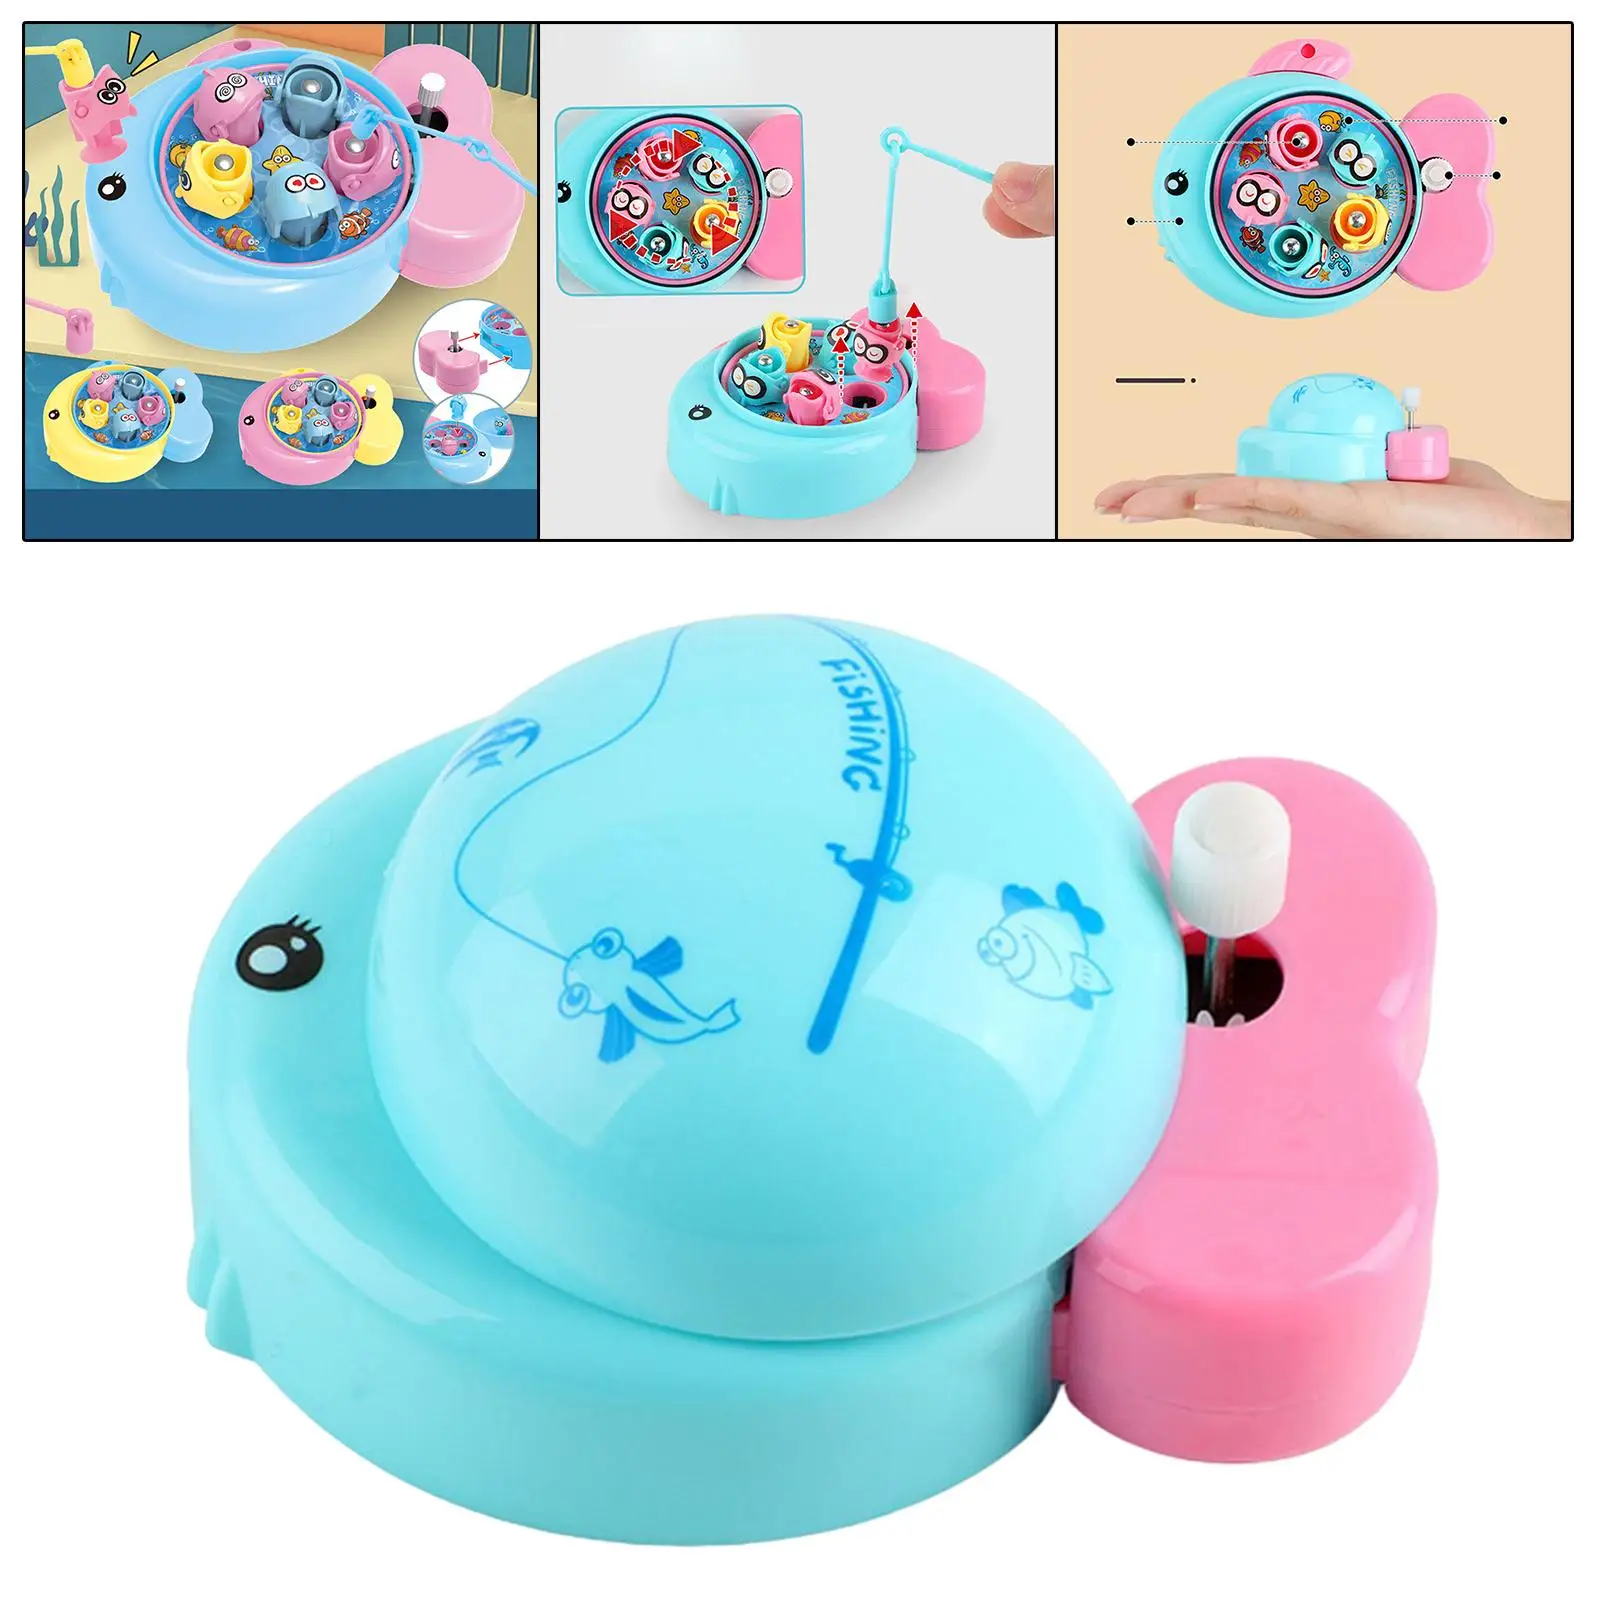 Fishing Toy Preschool Learning Interactive Toys Clock Toy for 3 4 5 Year Old